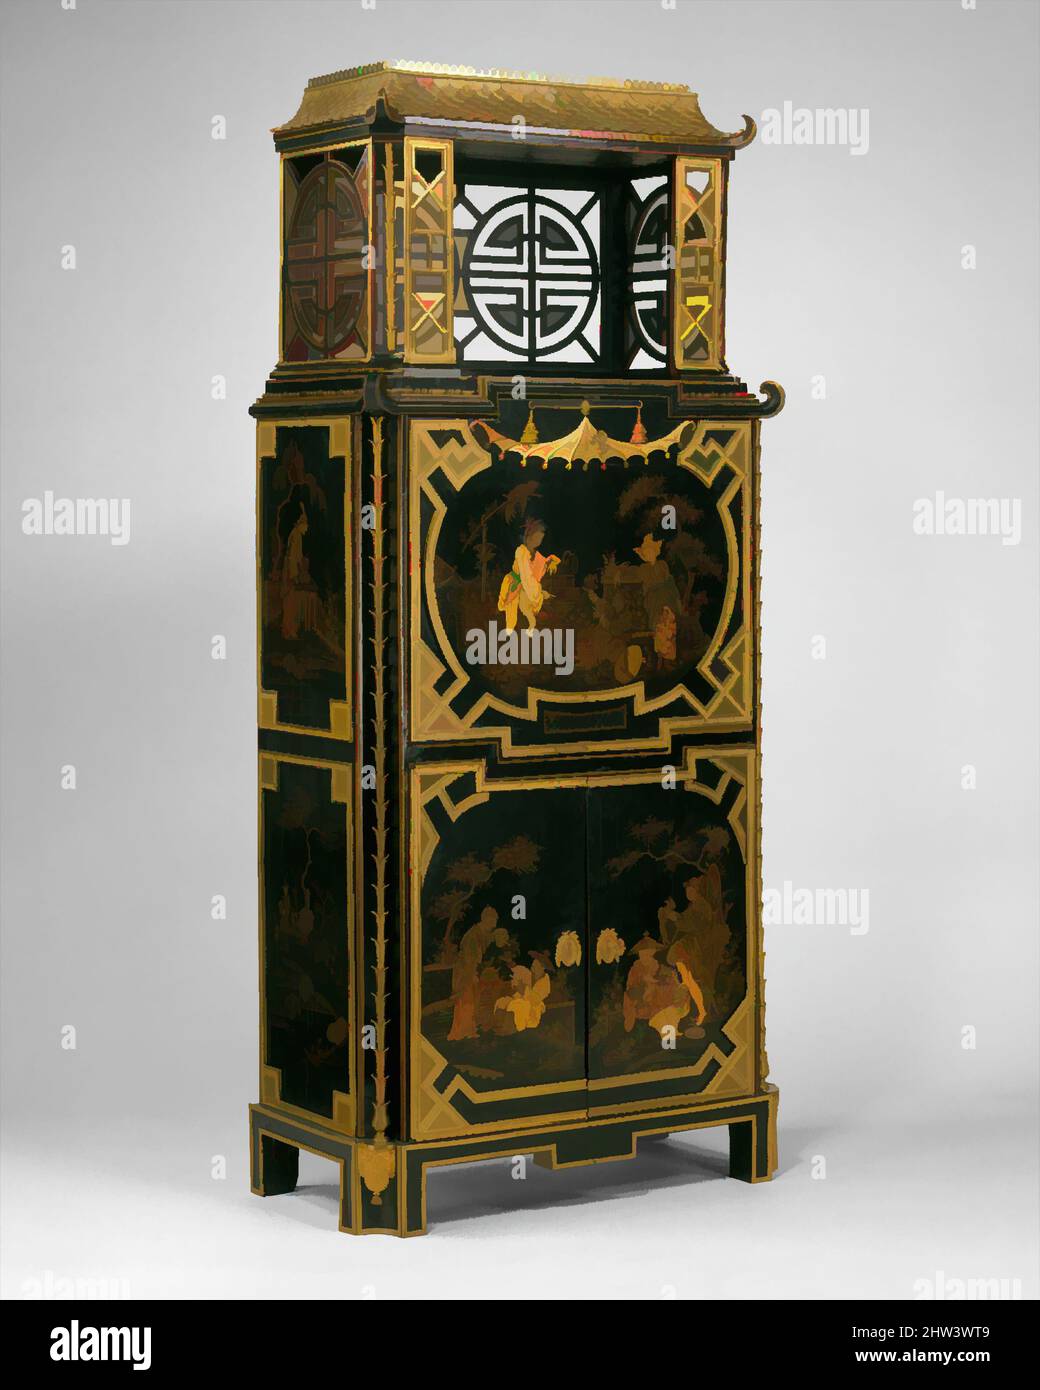 Art inspired by Drop-front secretaire (secrètaire à abattant), René Dubois (1737–1799, master 1755), ca. 1770–75, French, Paris, Painted and varnished oak, veneered with European lacquer, mahogany, purplewood, gilt-bronze mounts, 60 x 26 3/4 x 13 3/8 in. (152.4 x 67.9 x 34cm), Woodwork, Classic works modernized by Artotop with a splash of modernity. Shapes, color and value, eye-catching visual impact on art. Emotions through freedom of artworks in a contemporary way. A timeless message pursuing a wildly creative new direction. Artists turning to the digital medium and creating the Artotop NFT Stock Photo